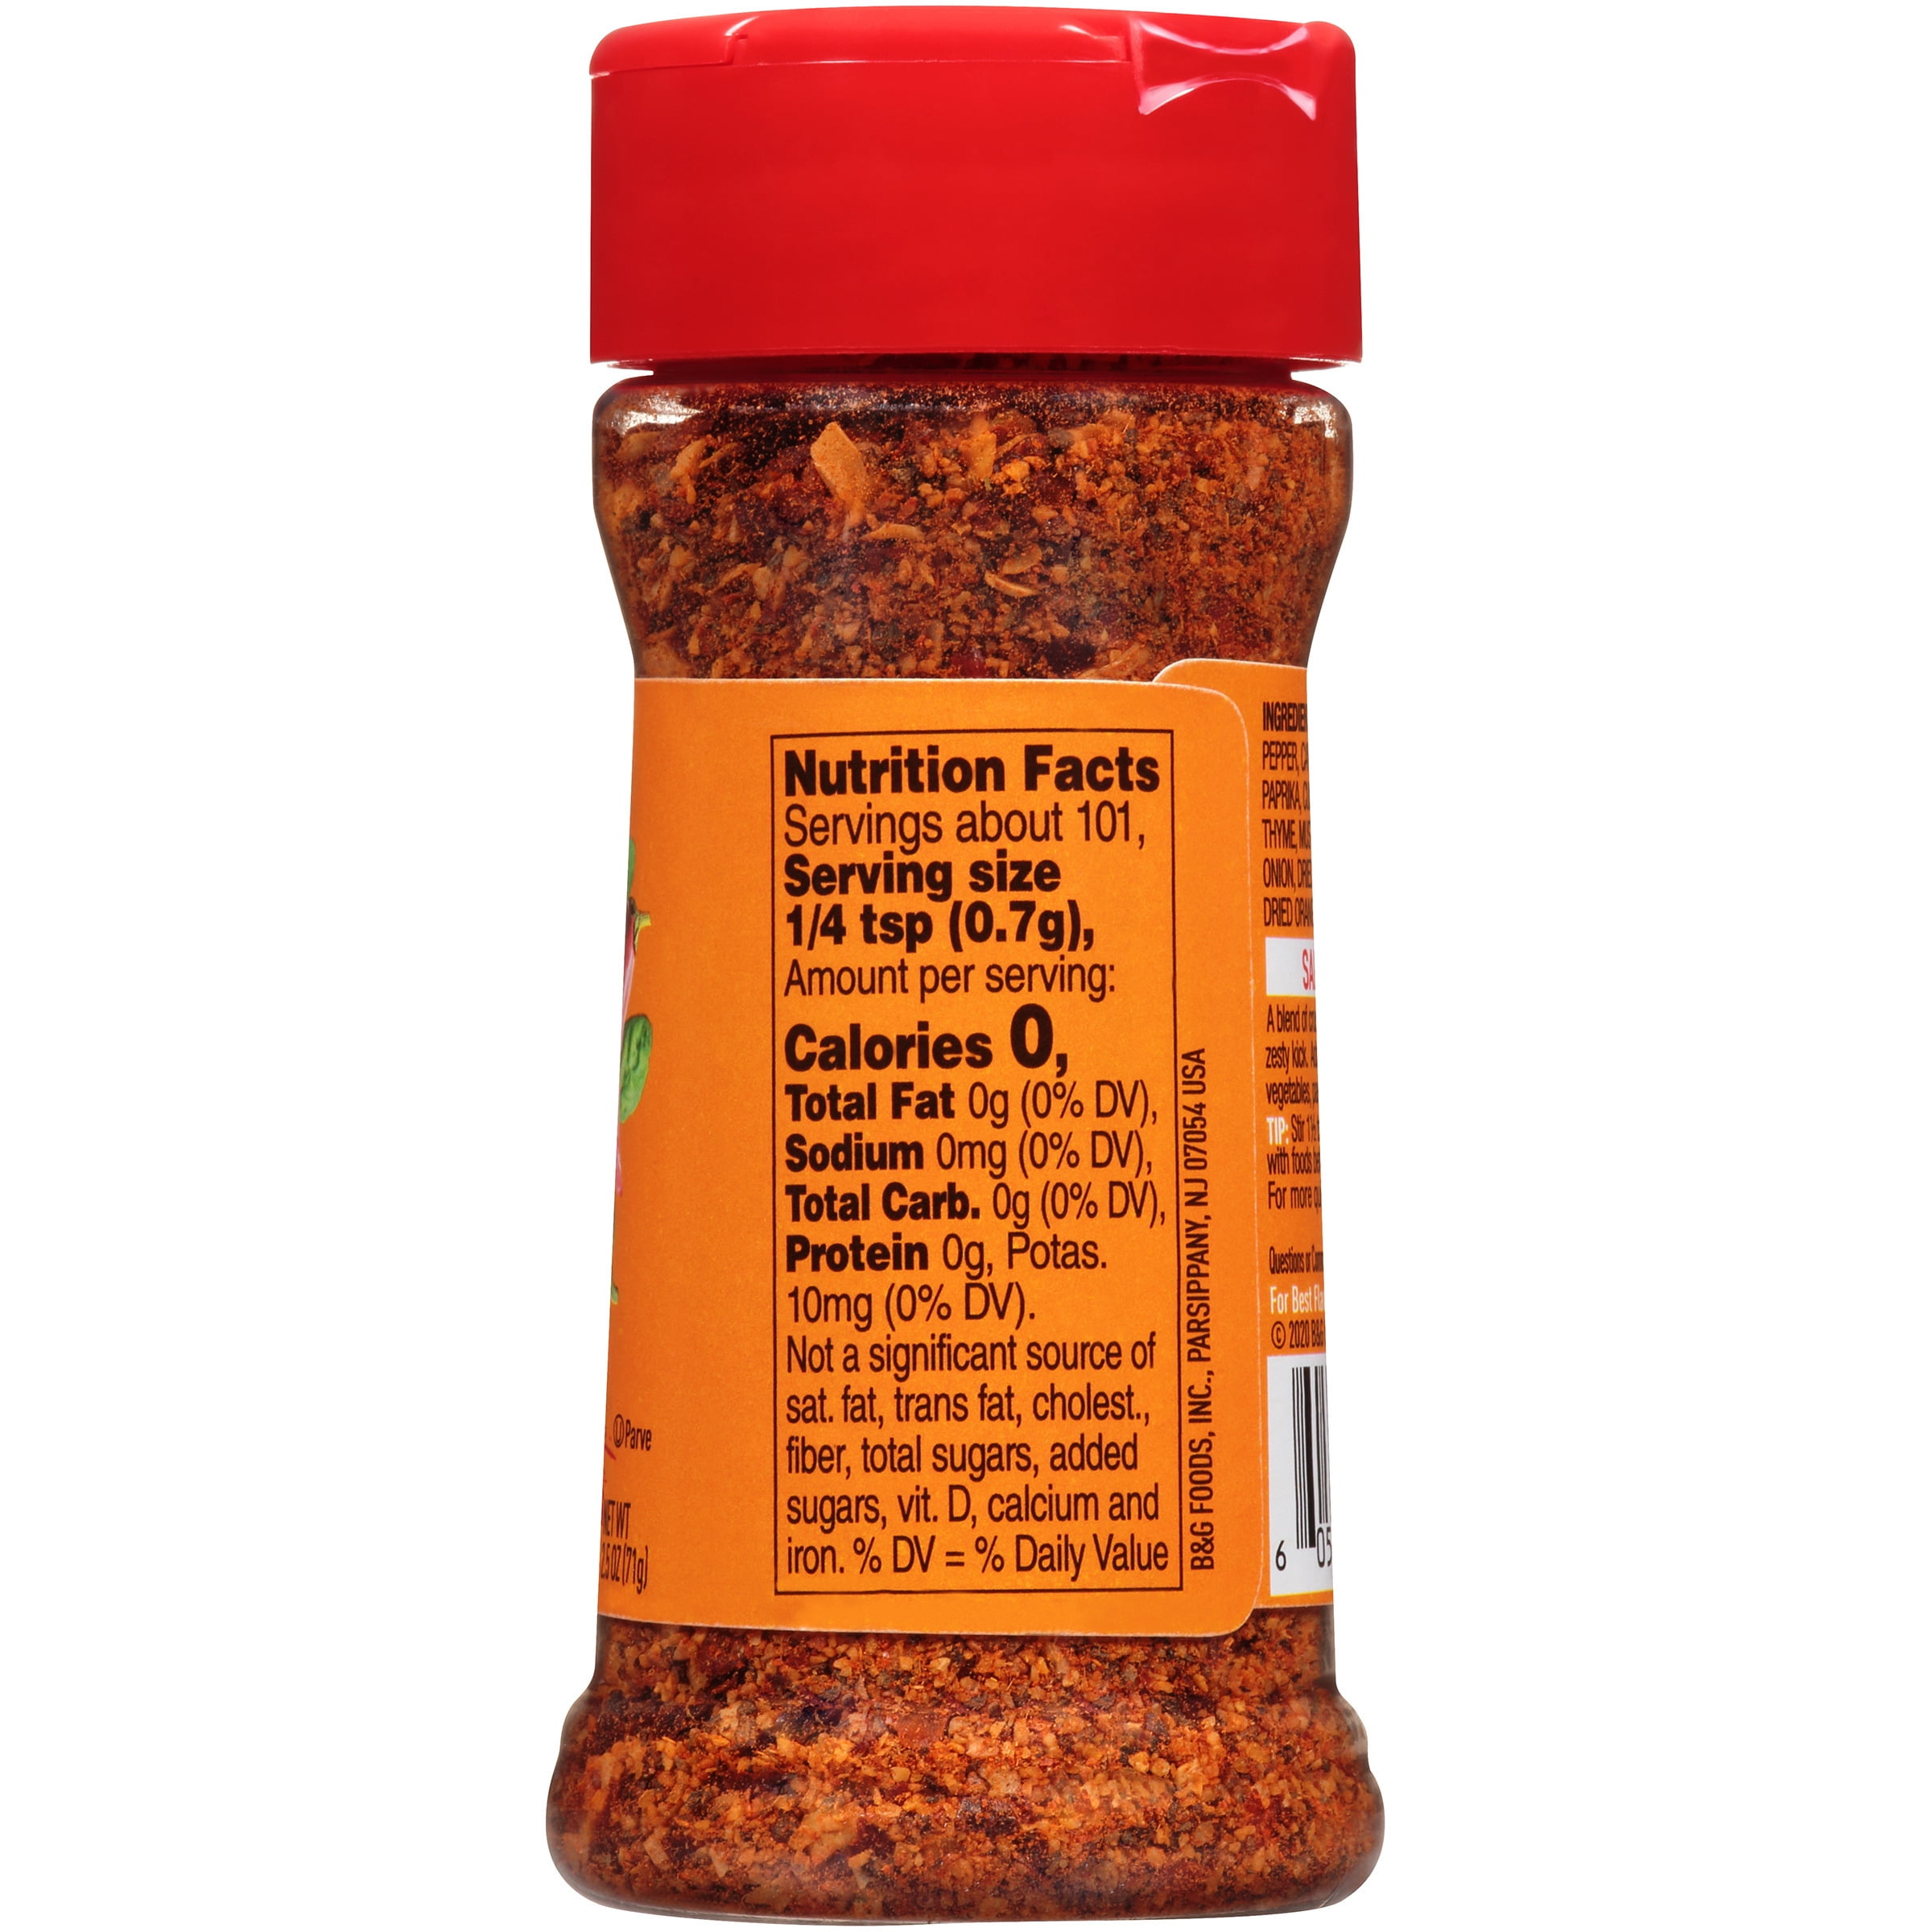 Mrs. Dash Extra Spicy Seasoning Blend, 2.5 oz - Fry's Food Stores